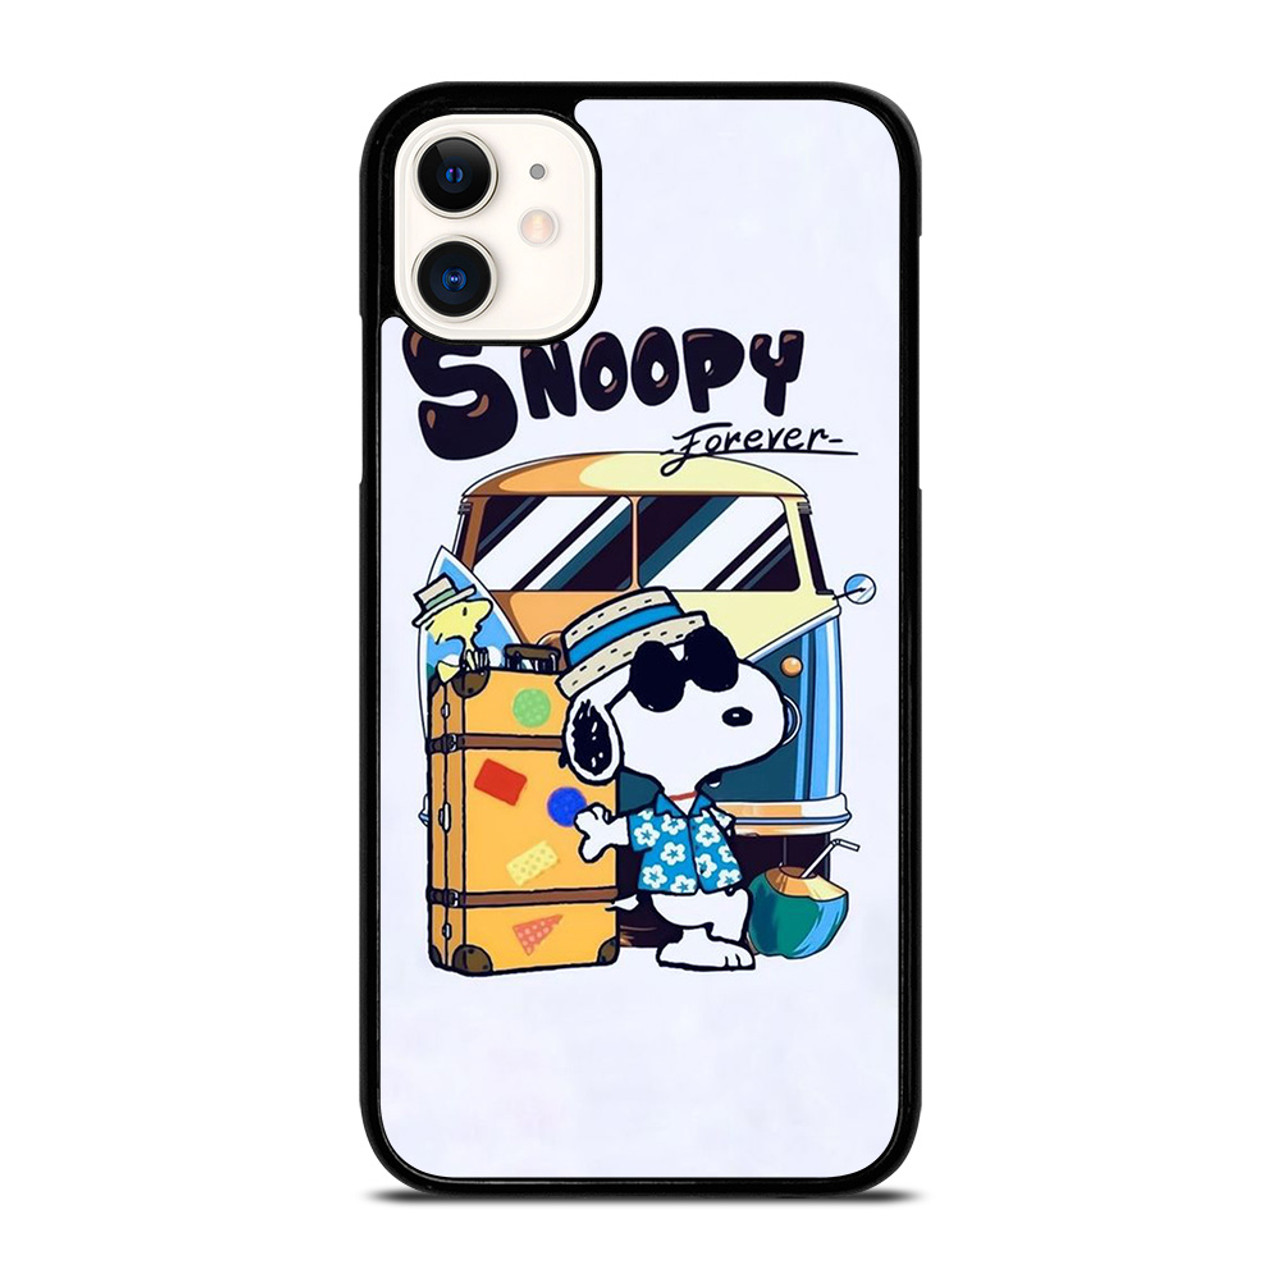 SNOOPY THE PEANUTS CHARLIE BROWN CARTOON FOREVER iPhone 11 Case Cover